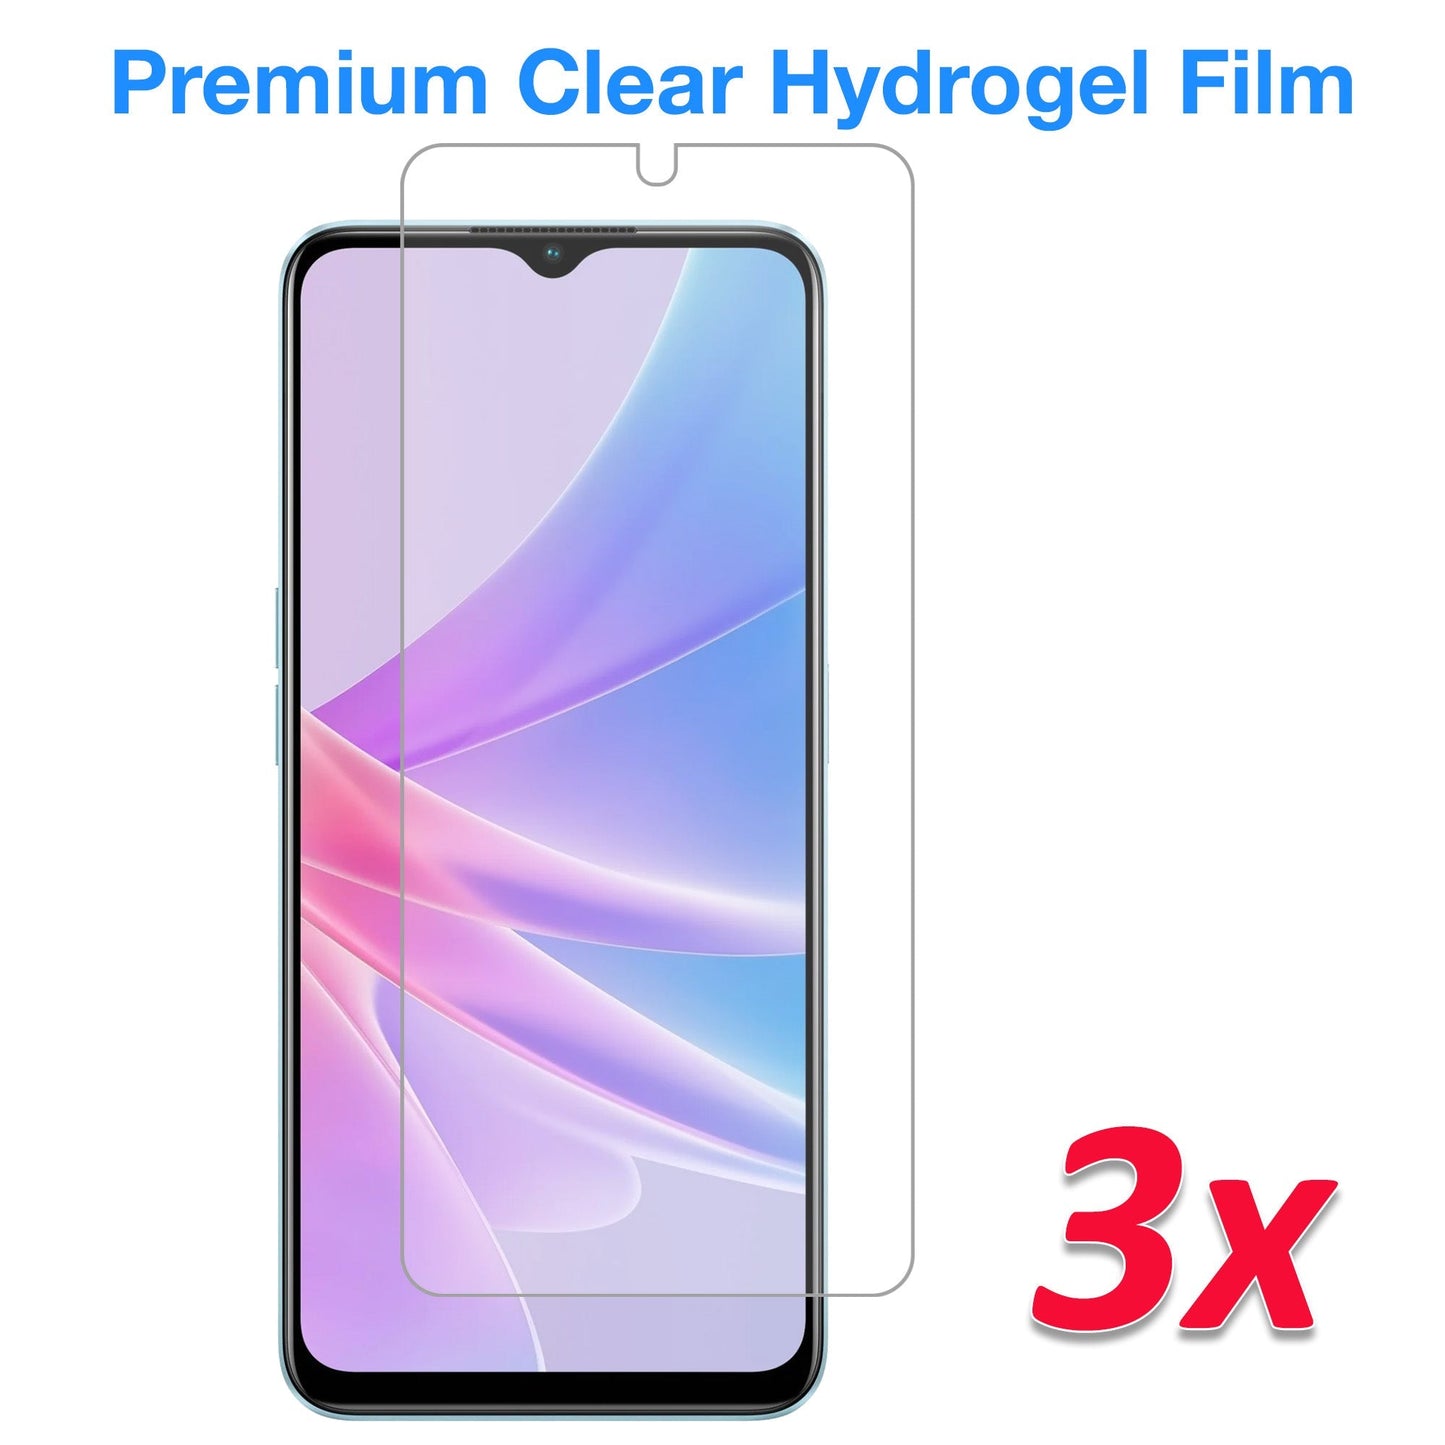 [3 Pack] MEZON OPPO A57 Premium Hydrogel Clear Edge-to-Edge Full Coverage Screen Protector Film